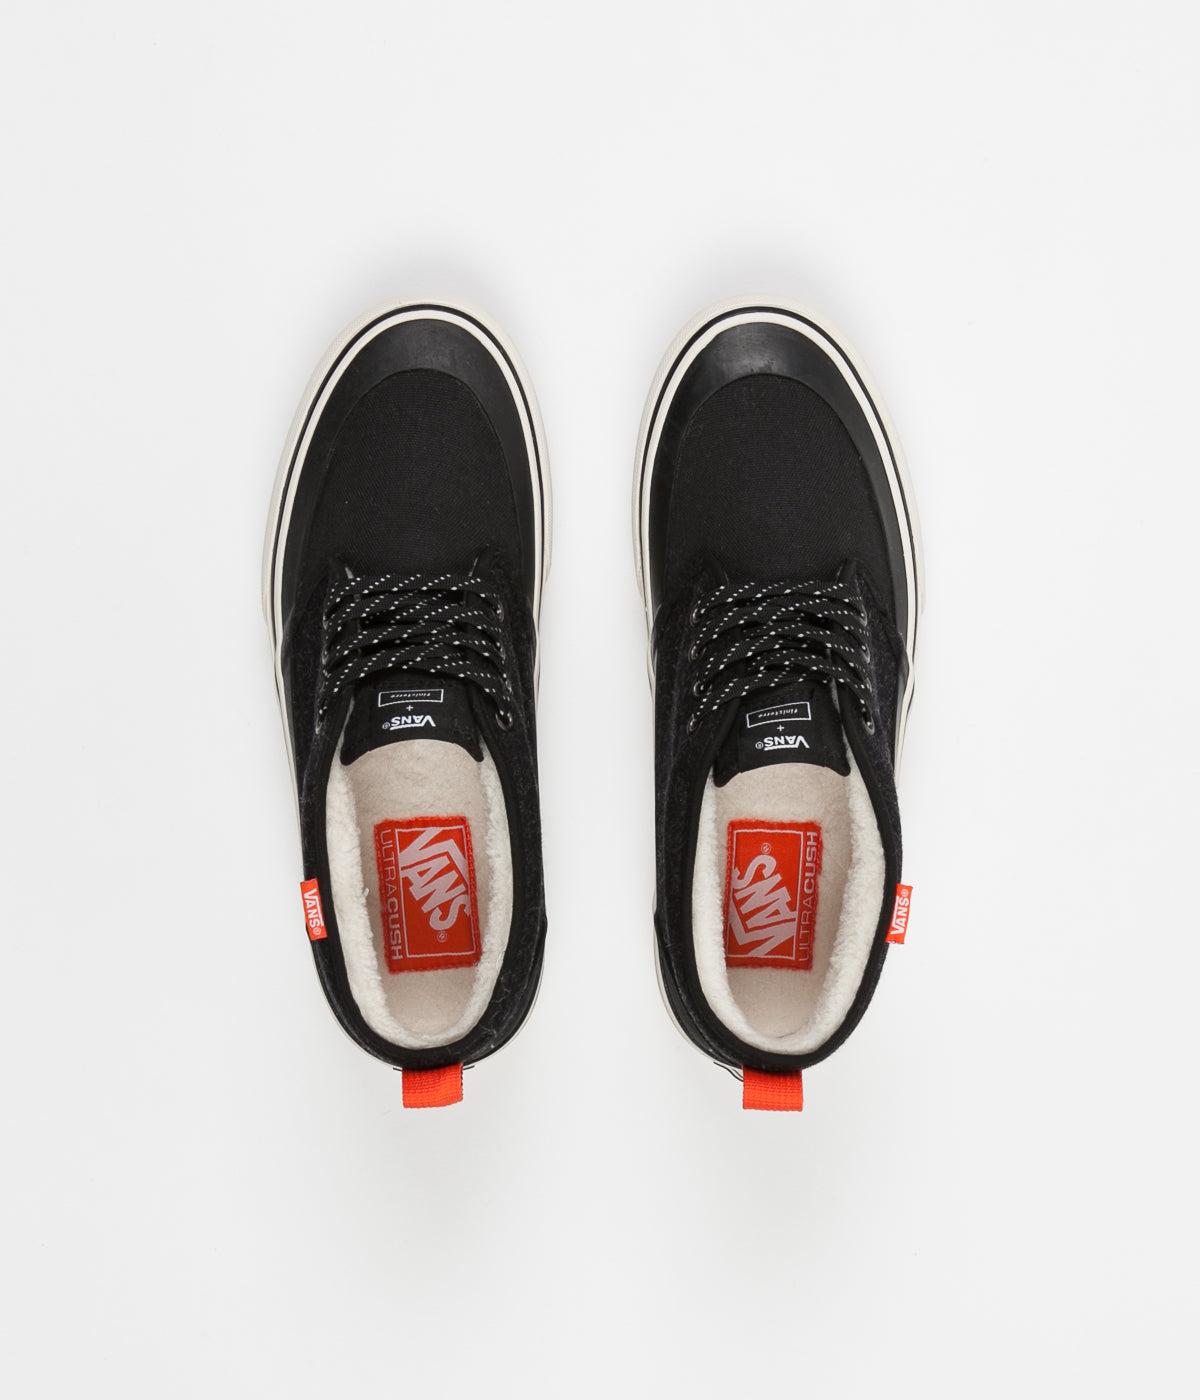 Vans X Finisterre Chukka HF Shoes 